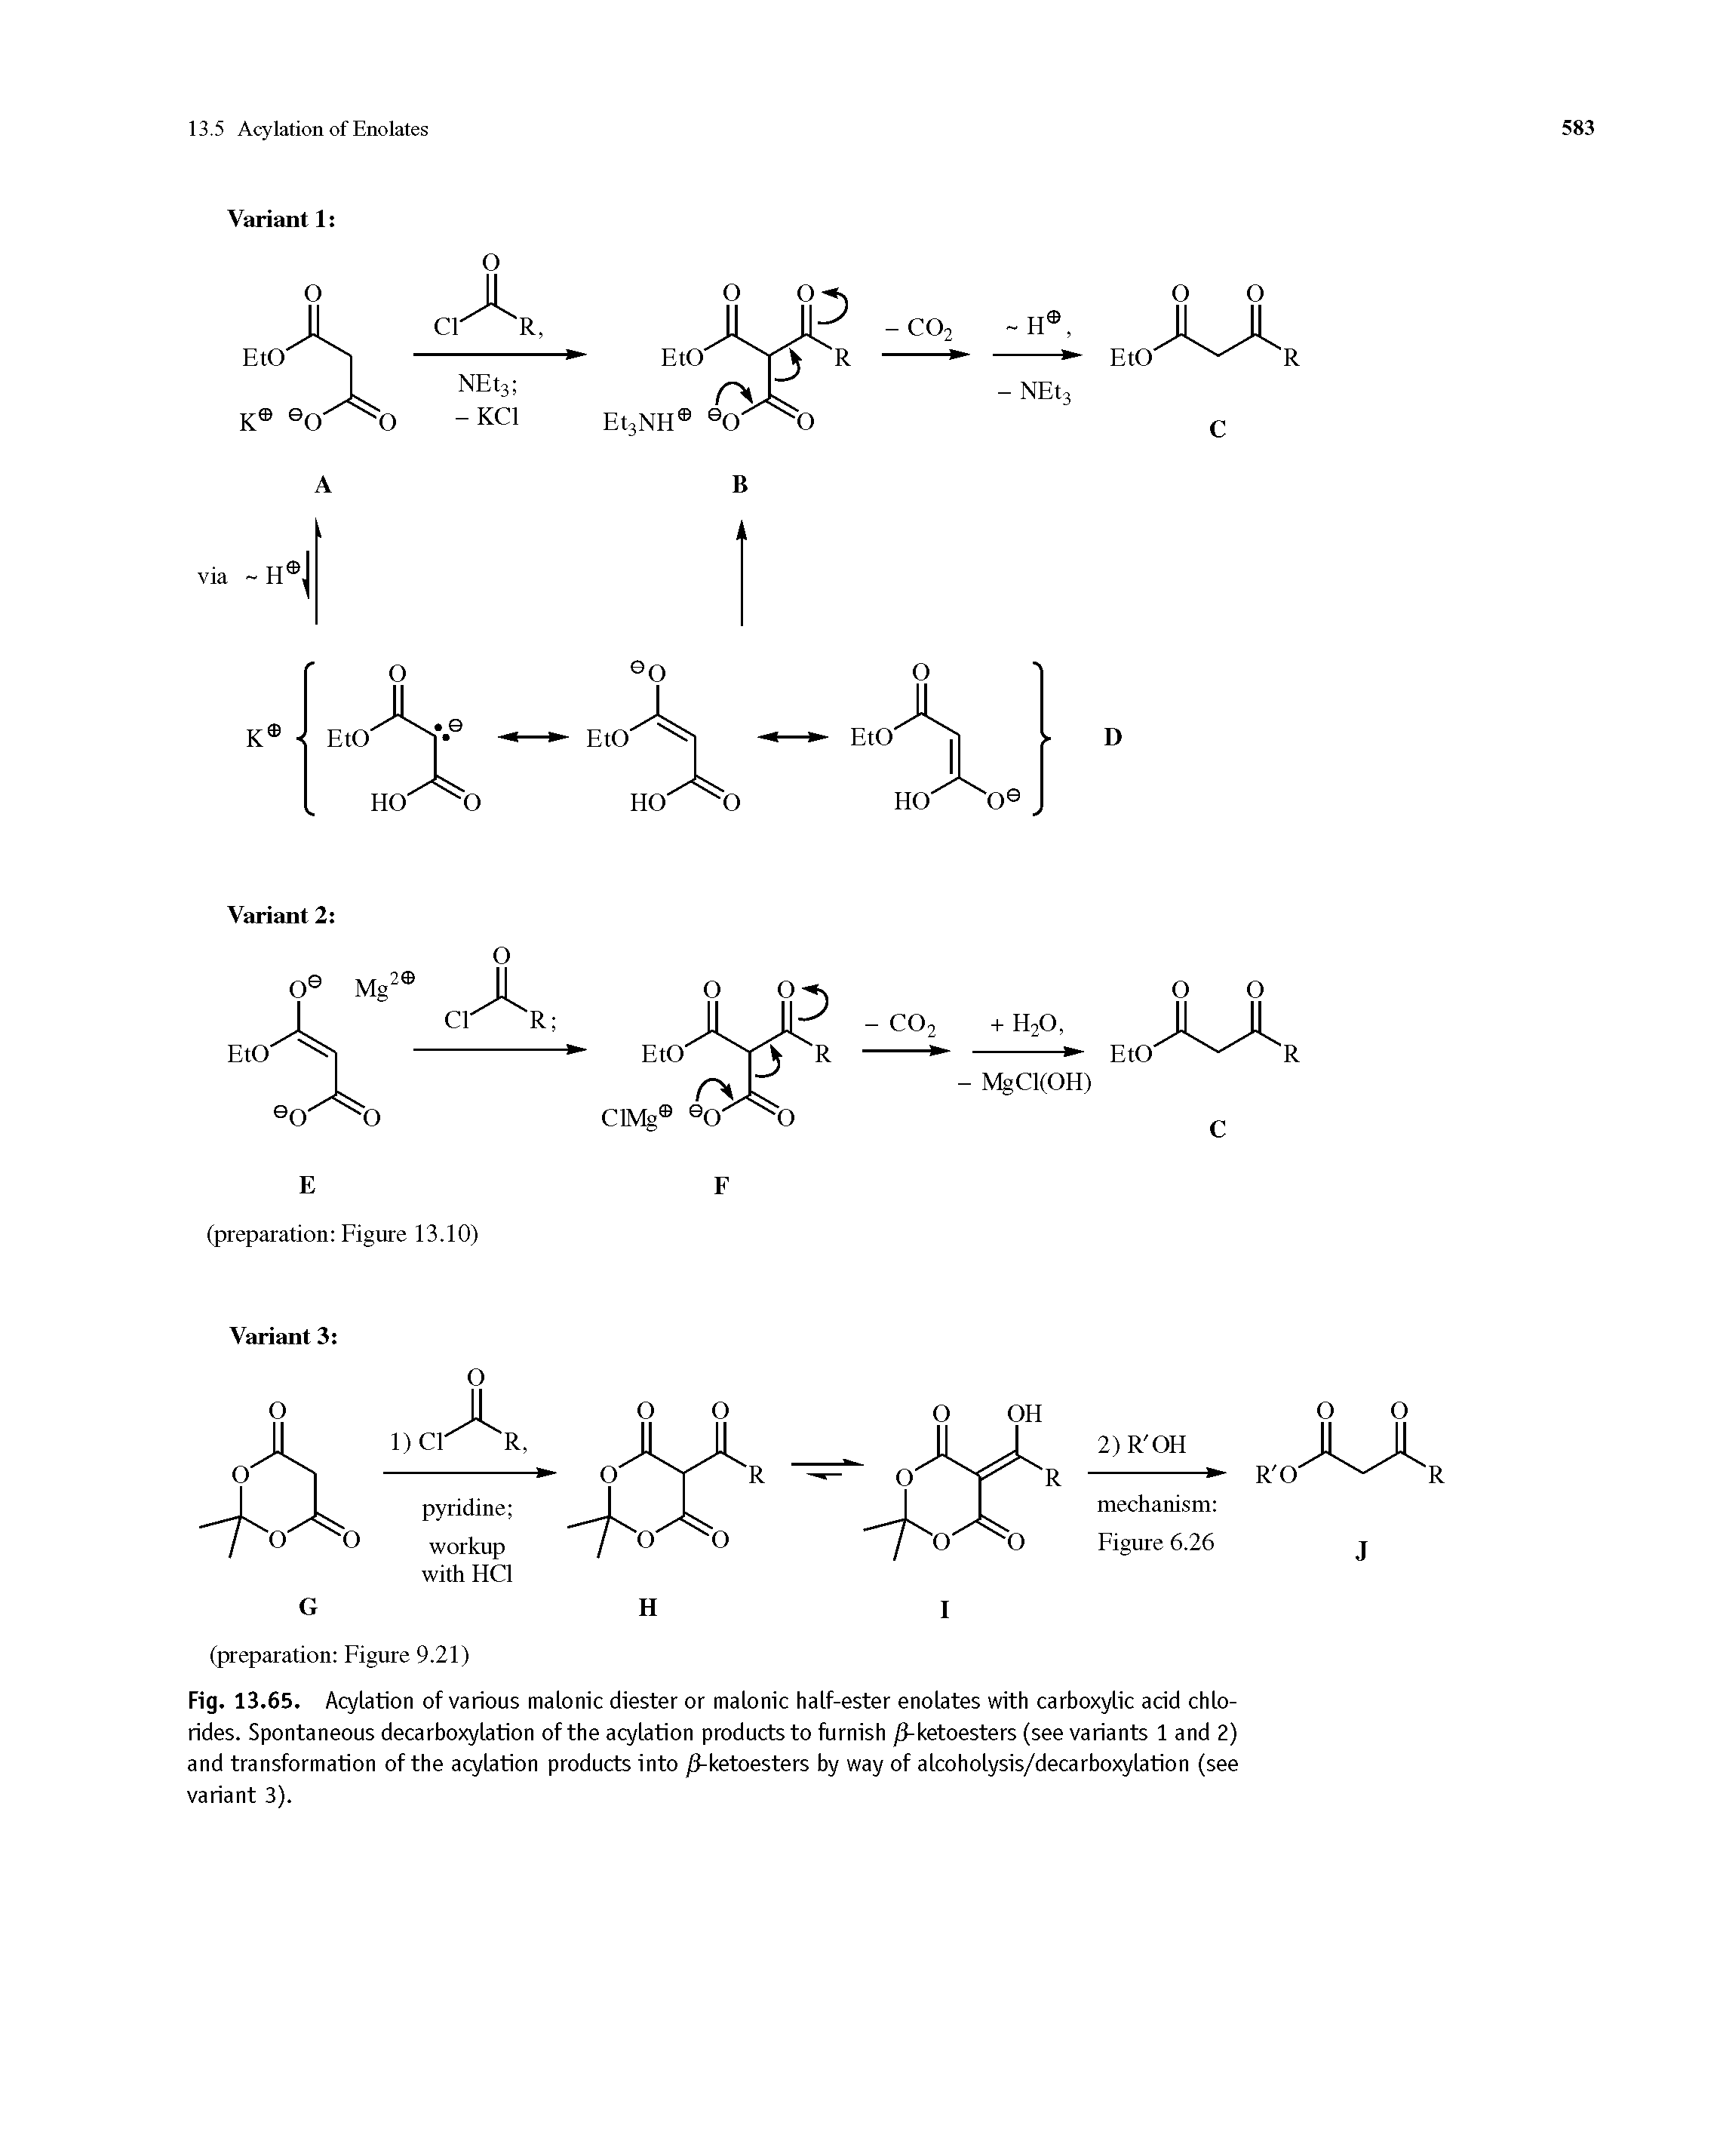 Fig. 13.65. Acylation of various malonic diester or malonic half-ester enolates with carboxylic acid chlorides. Spontaneous decarboxylation of the acylation products to furnish /3-ketoesters (see variants 1 and 2) and transformation of the acylation products into /3-ketoesters by way of alcoholysis/decarboxylation (see variant 3).